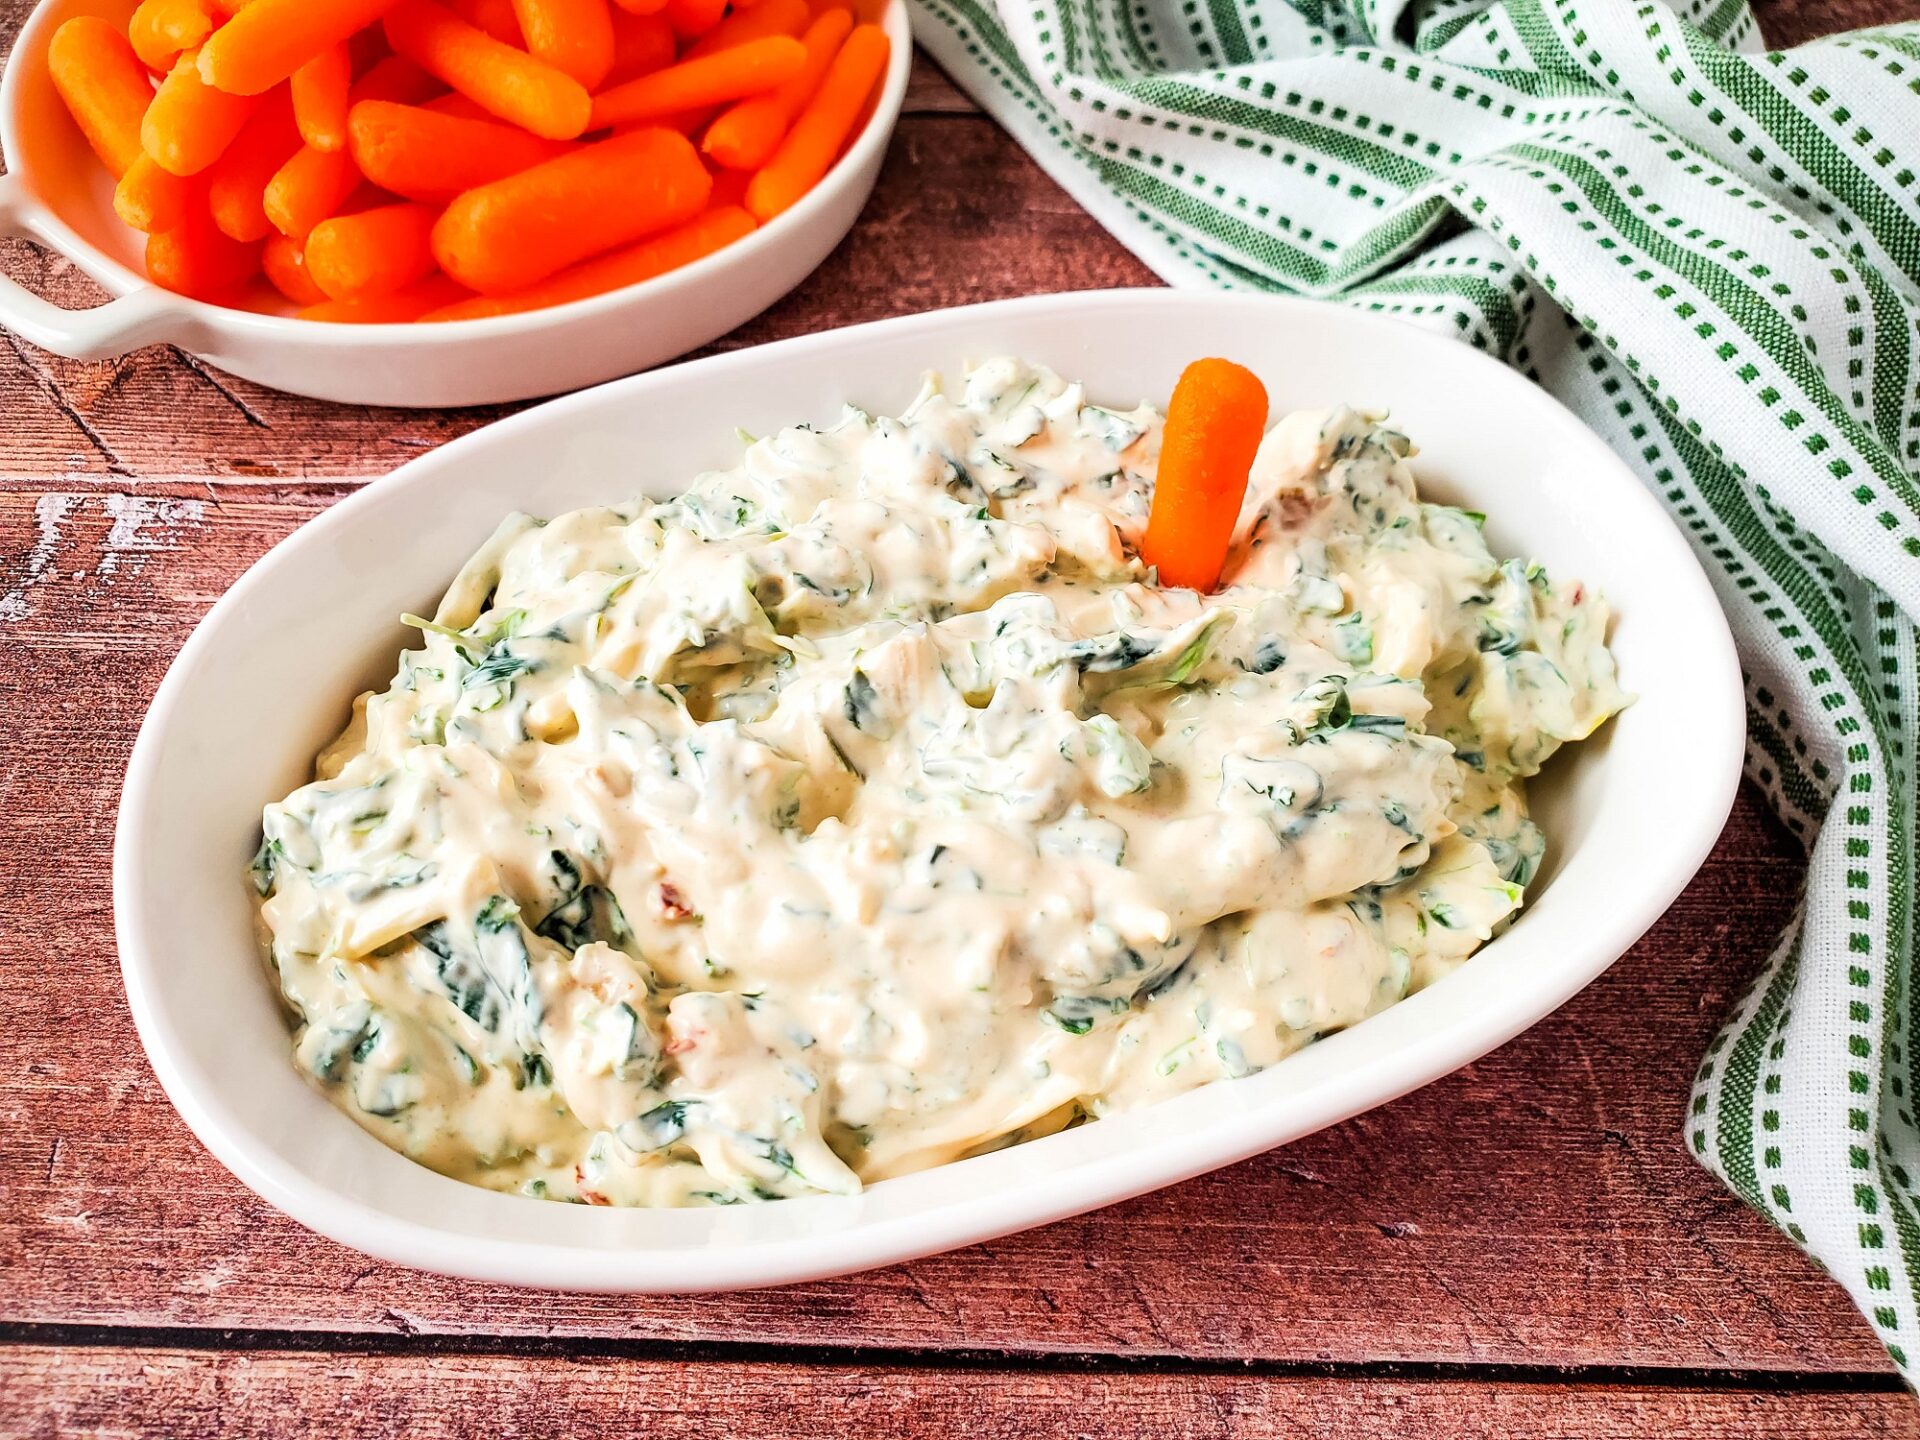 Spinach dip made with Knorr vegetable soup mix in a bowl with carrots for dipping.